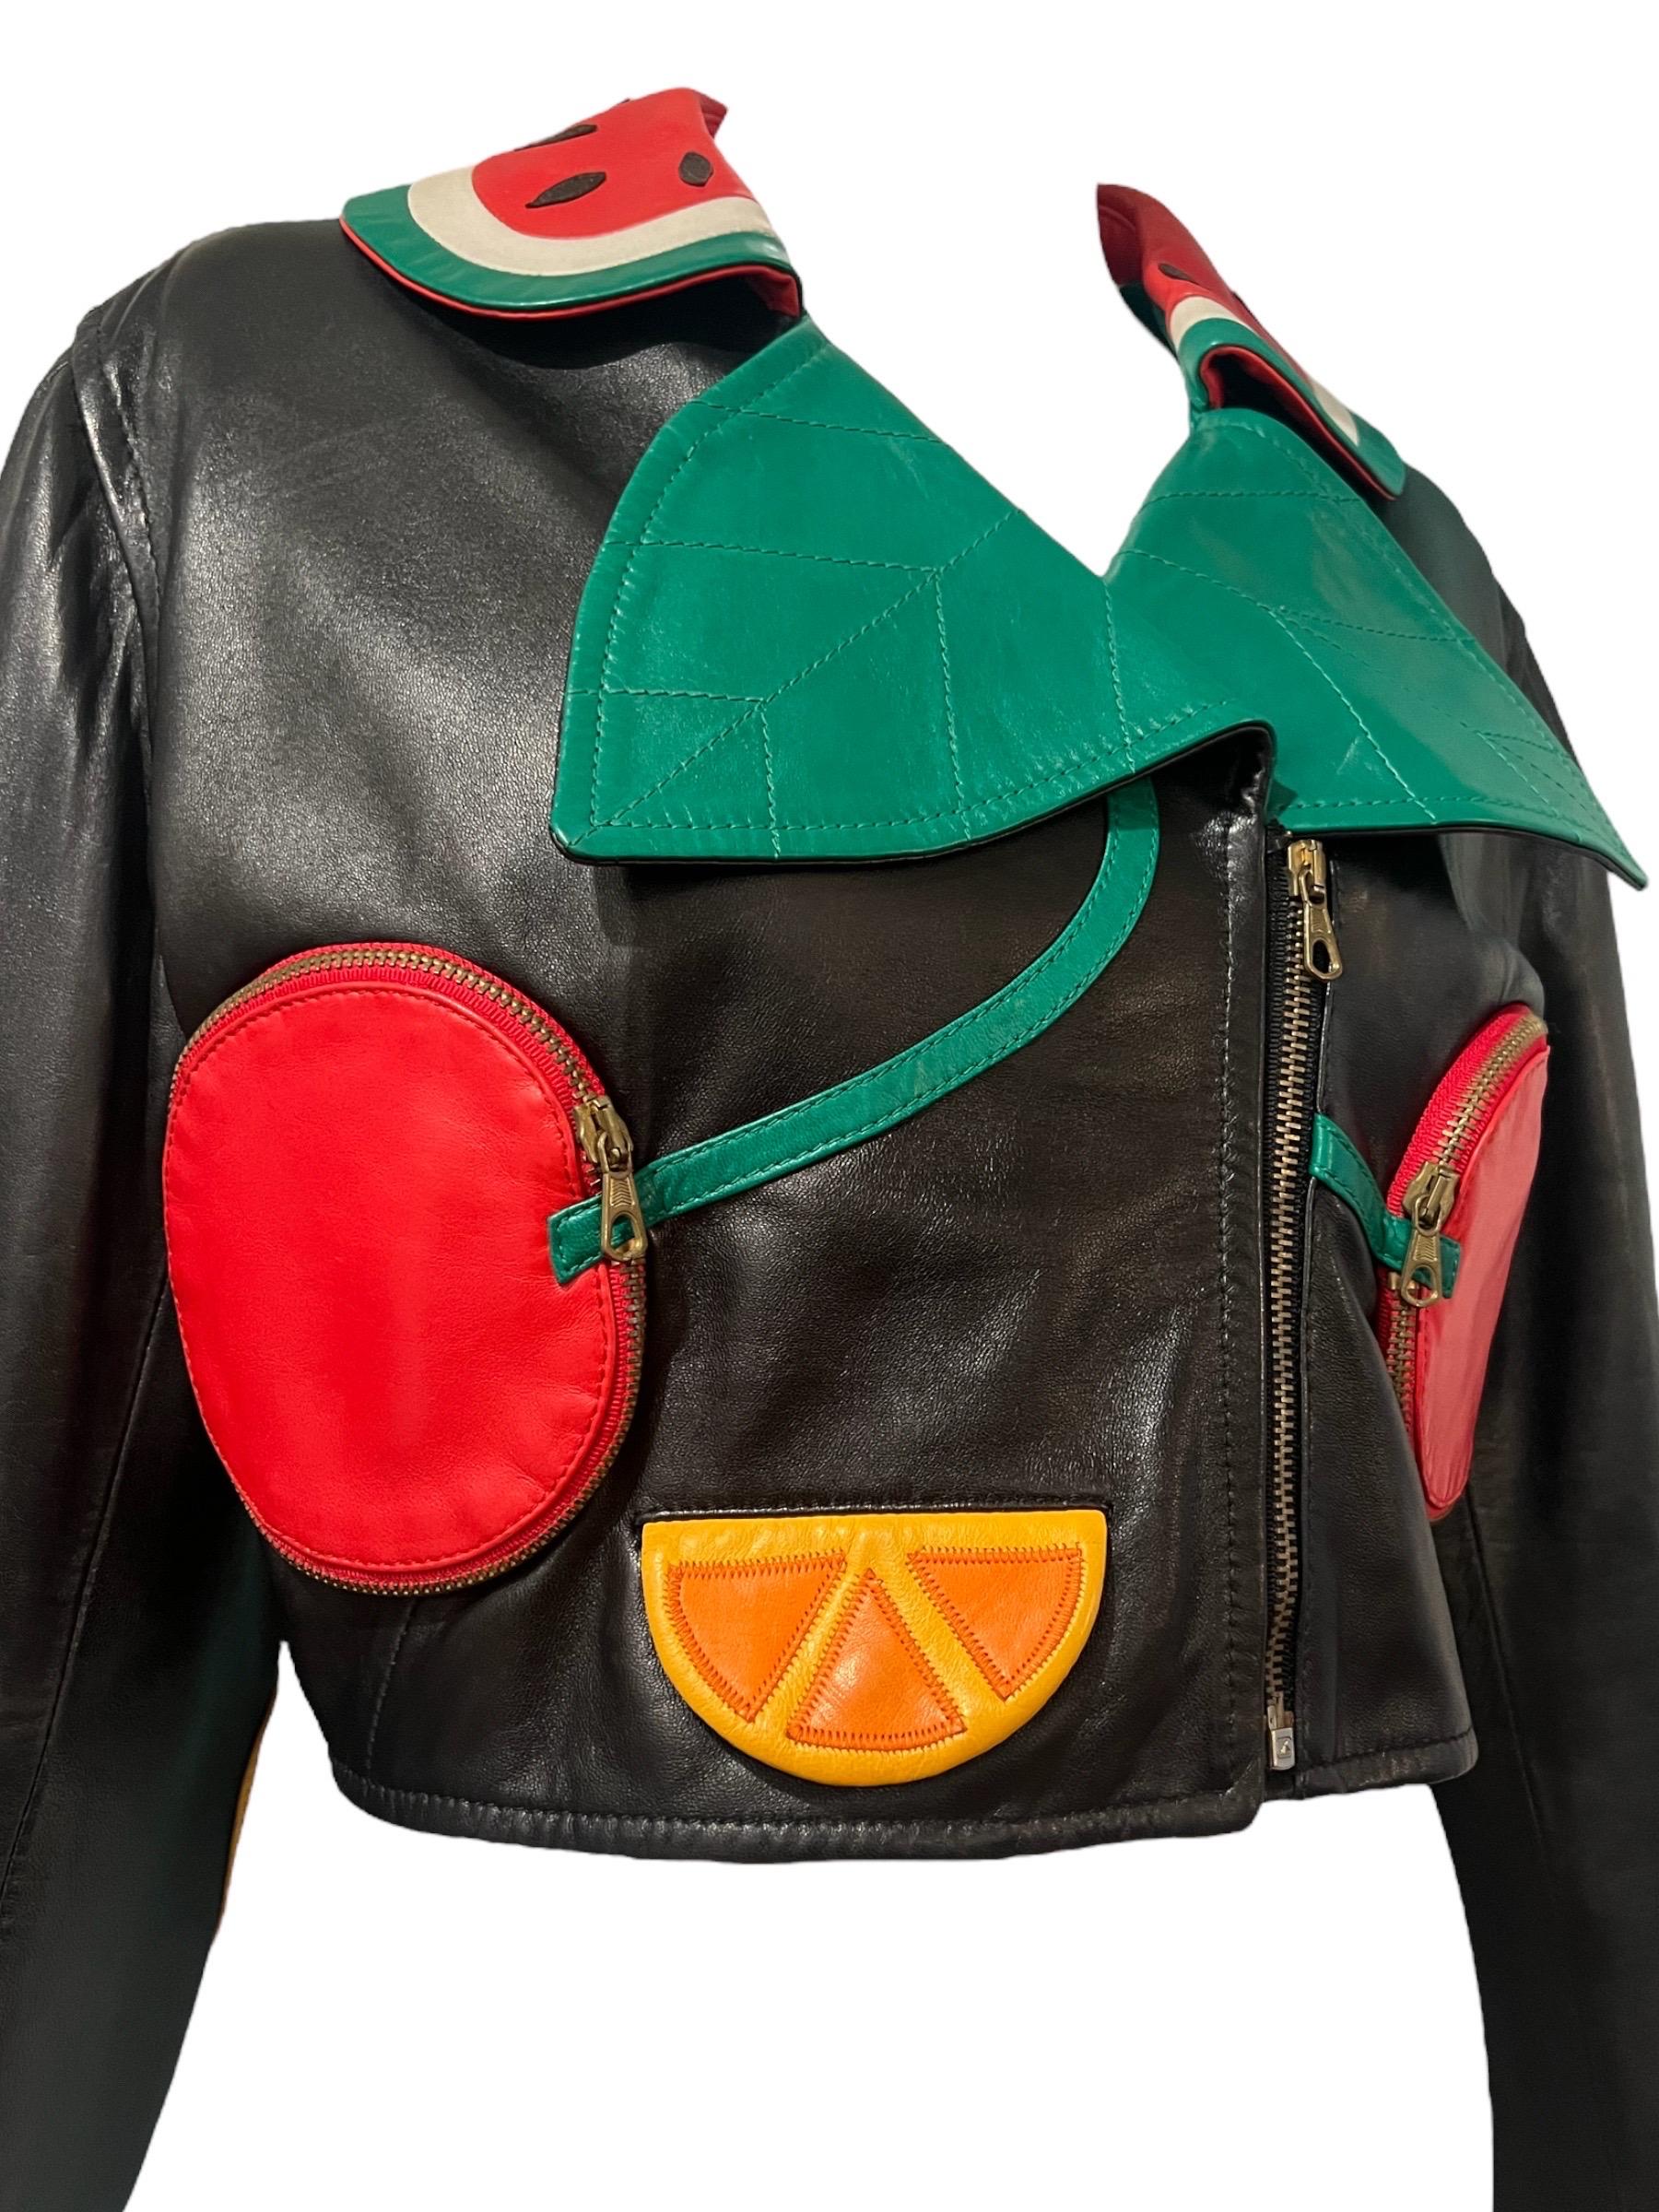 1990's Moschino Fruit Biker Vintage Leather Jacket In Excellent Condition For Sale In Concord, NC